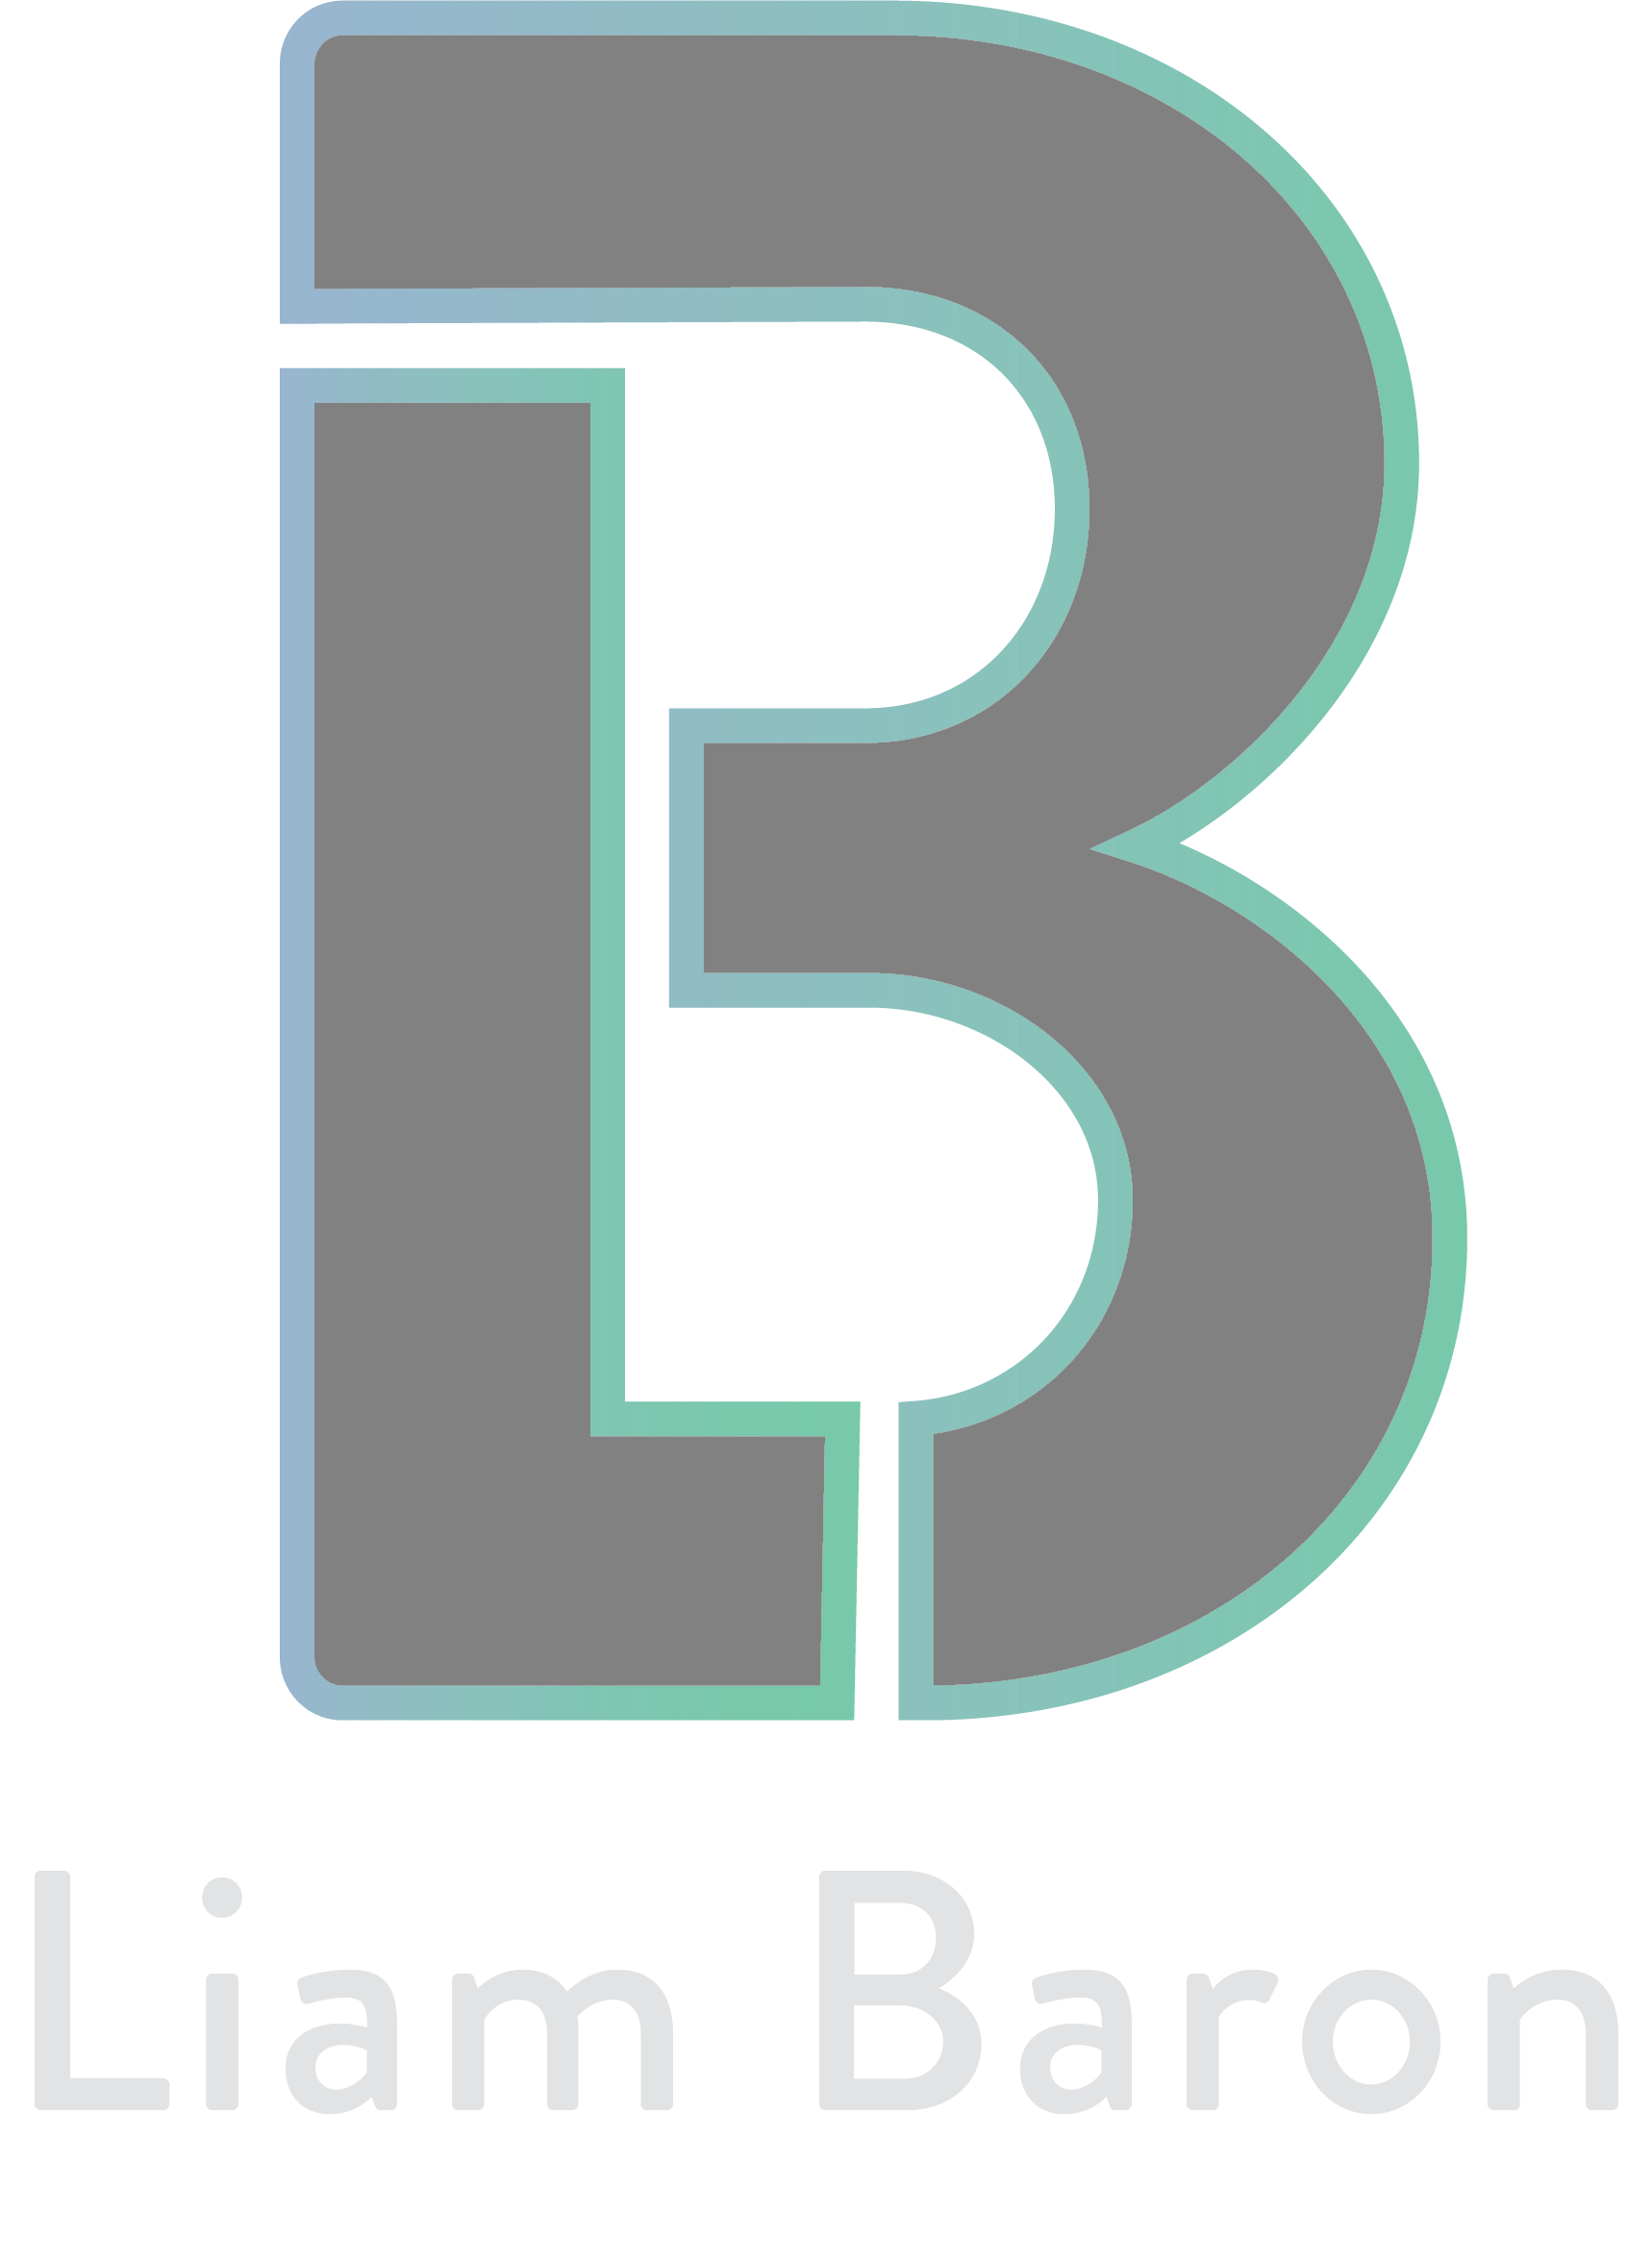 Liam Baron logo, the logo is the fusion of the letters L and B